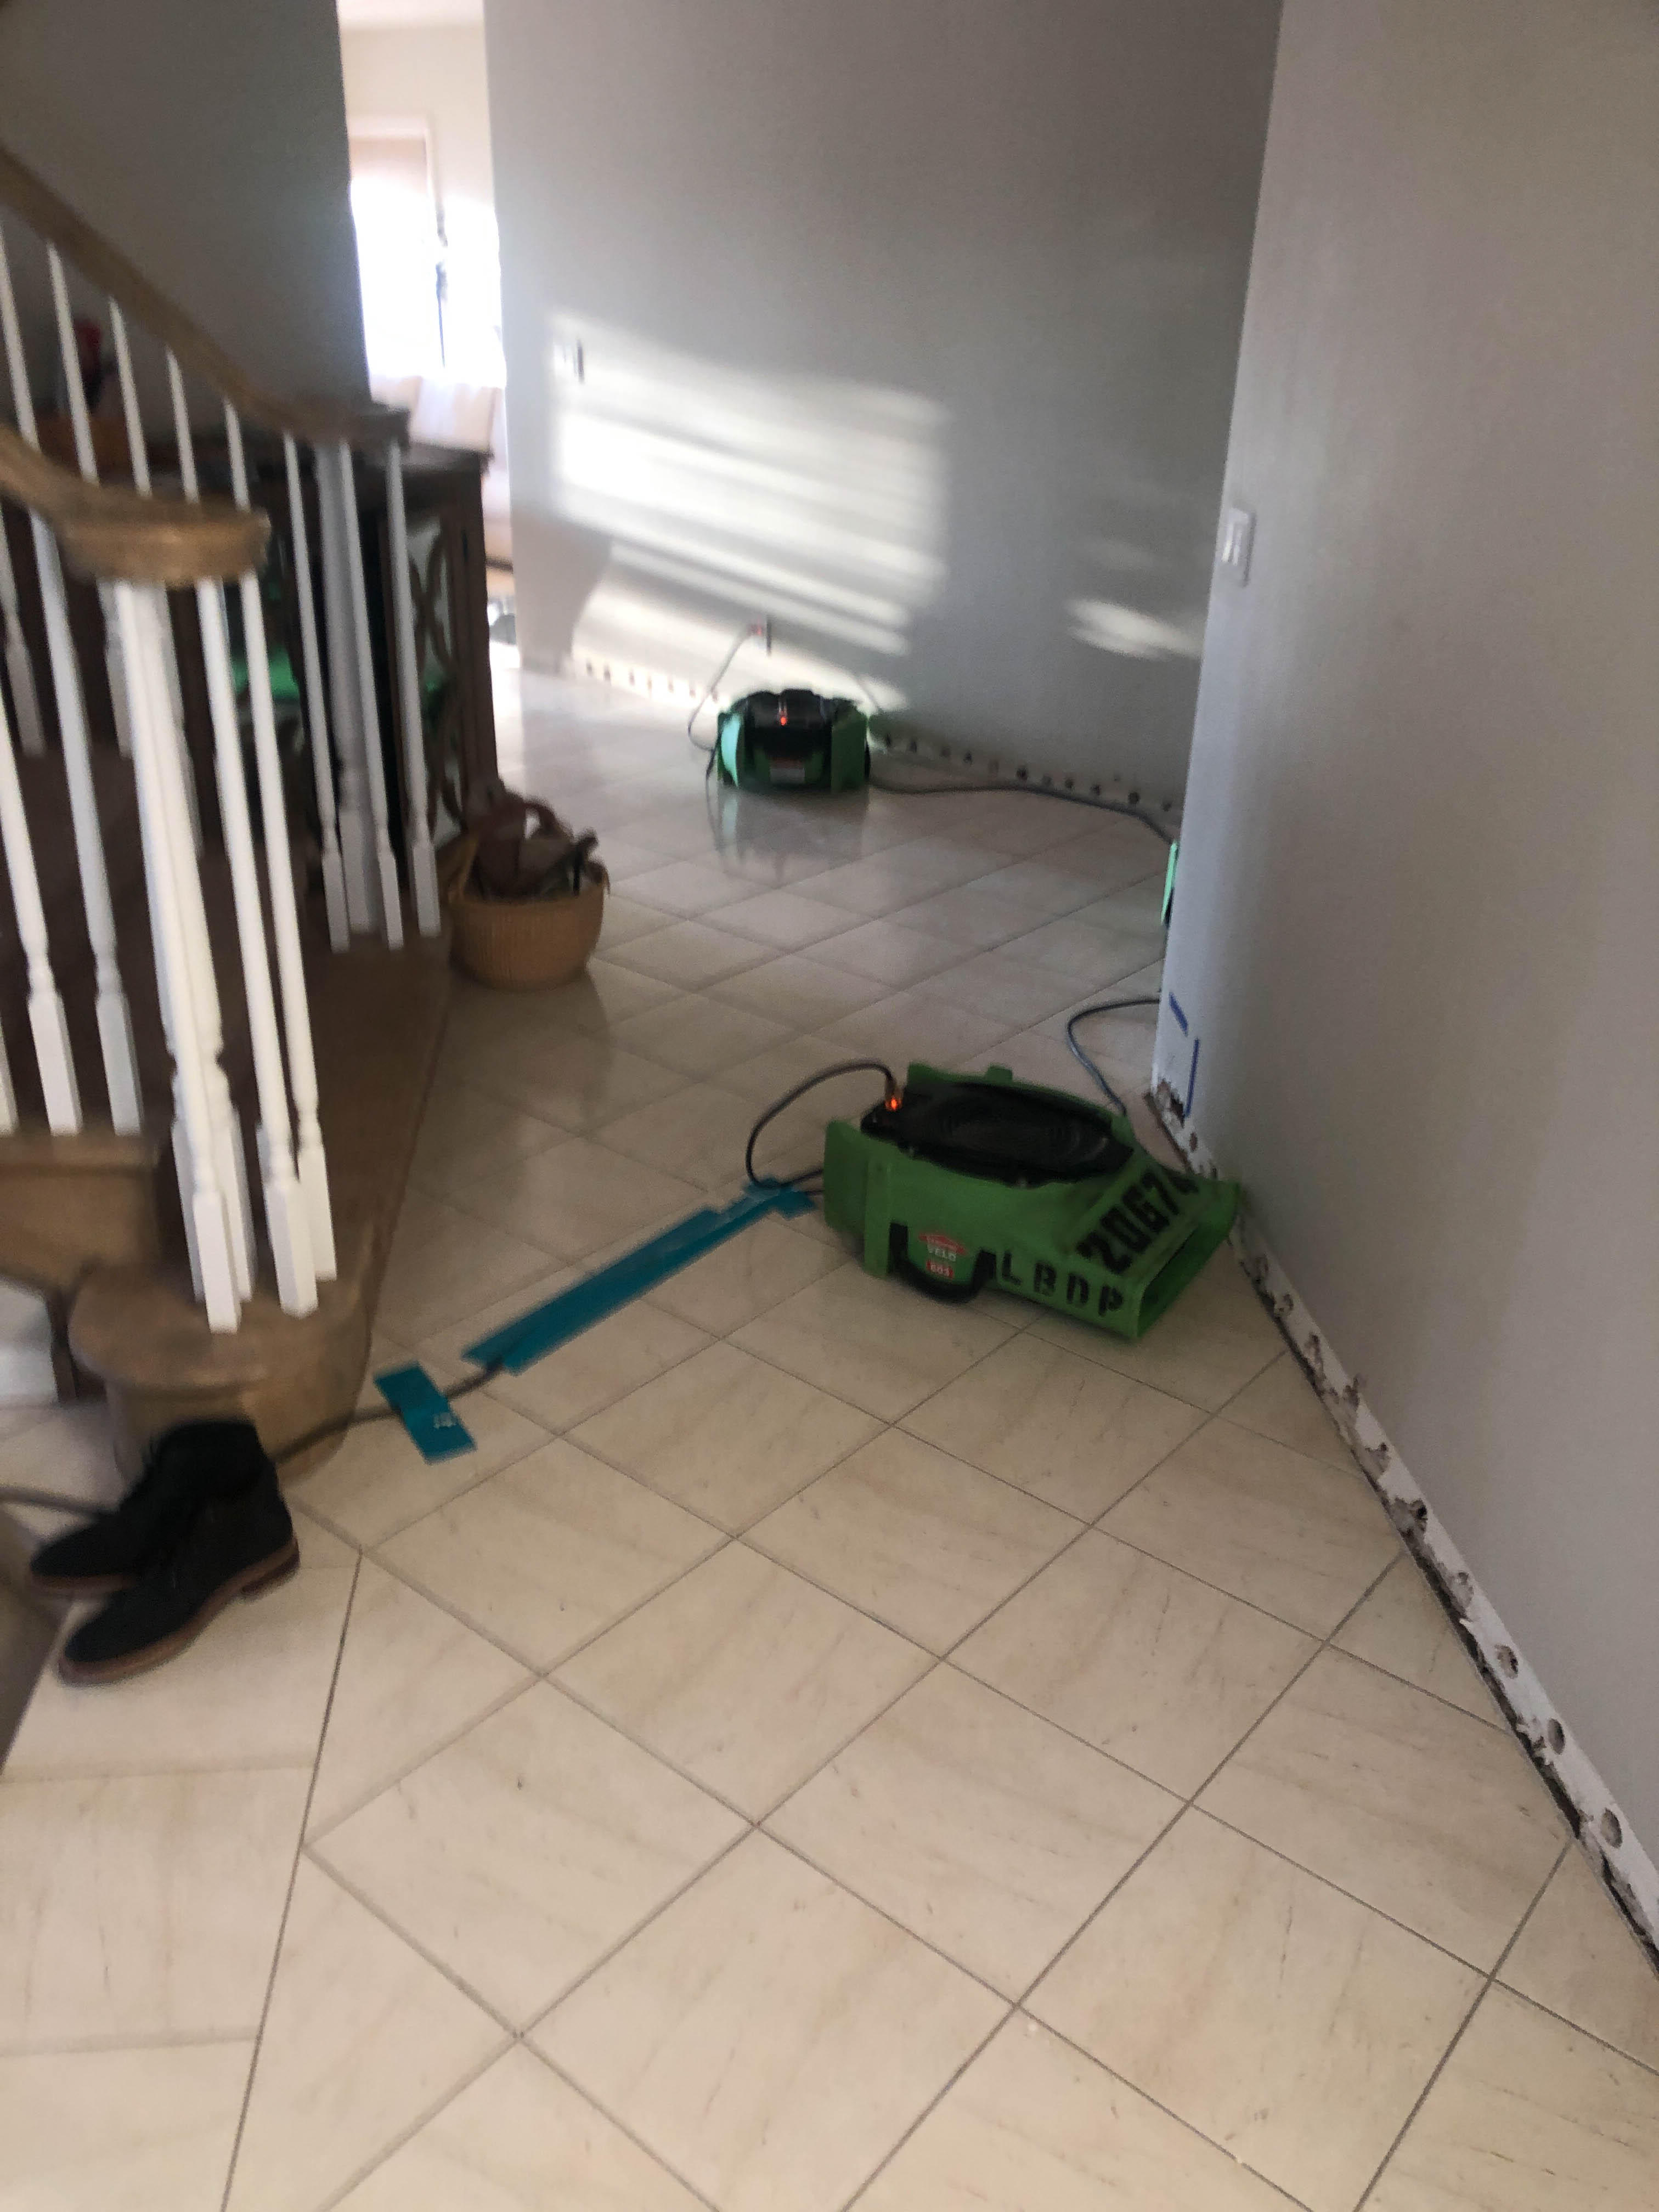 Is there any standing water, wetness, or other signs of water damage in your Anaheim, CA home? Call SERVPRO of Anaheim West today!